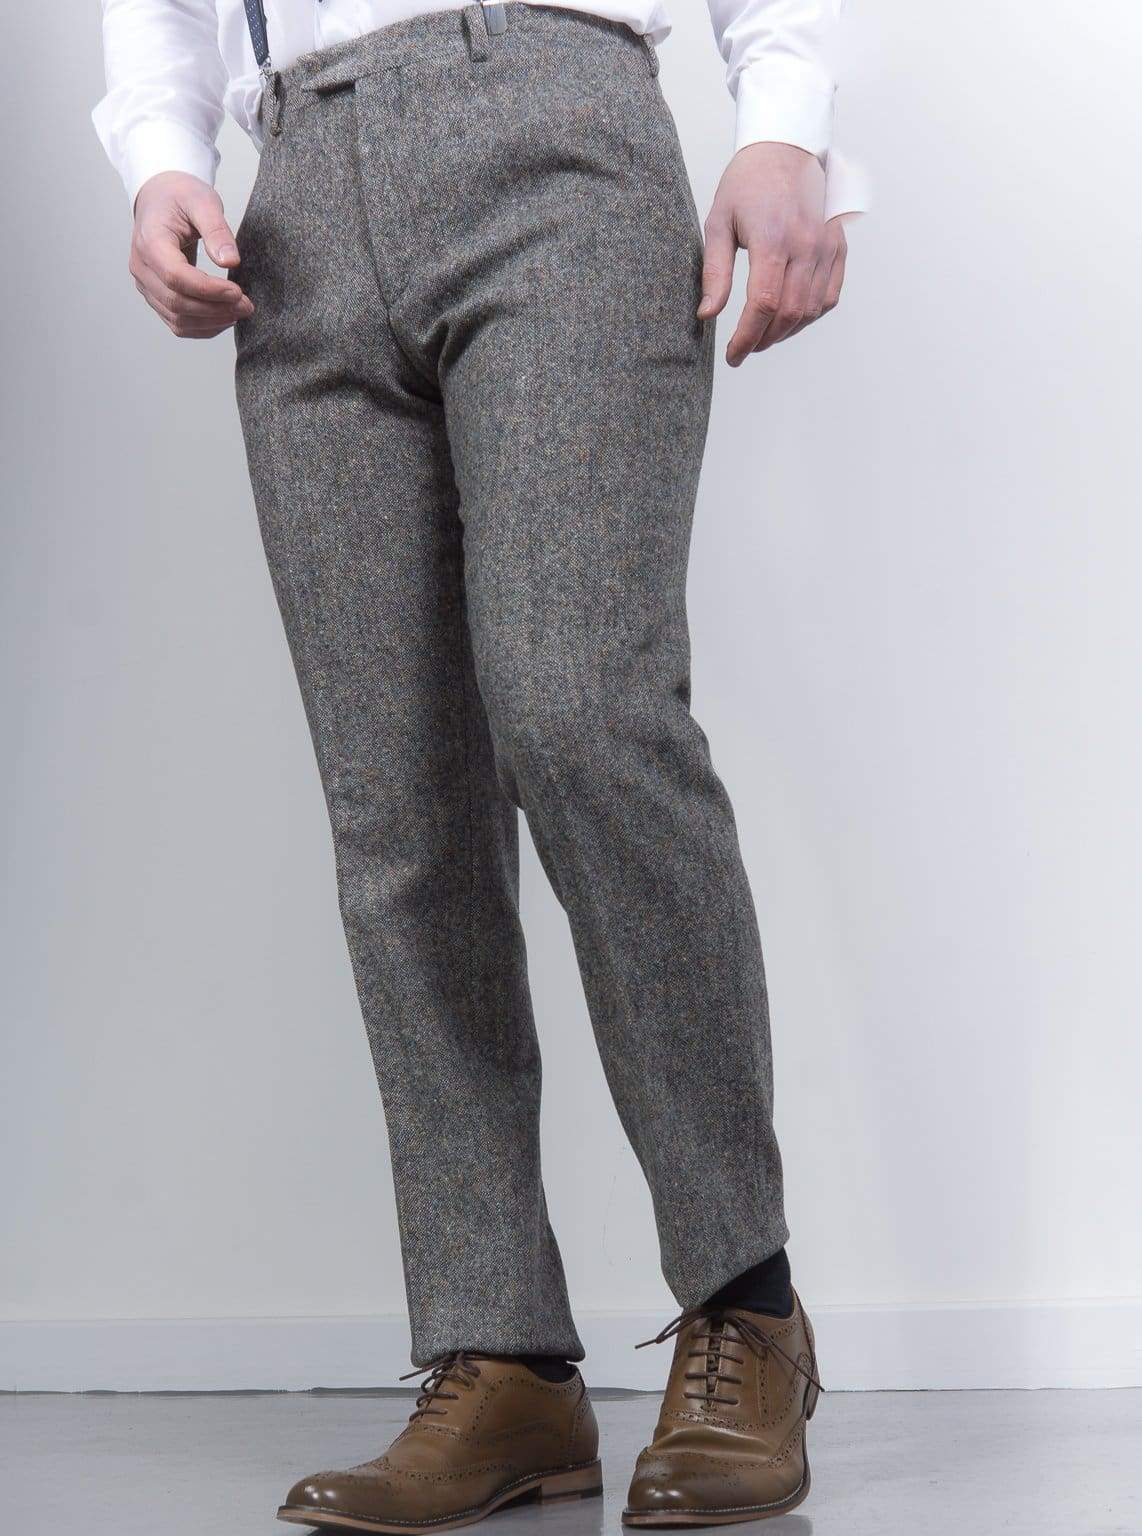 torre tweed mens grey donegal trousers menswearr com 539